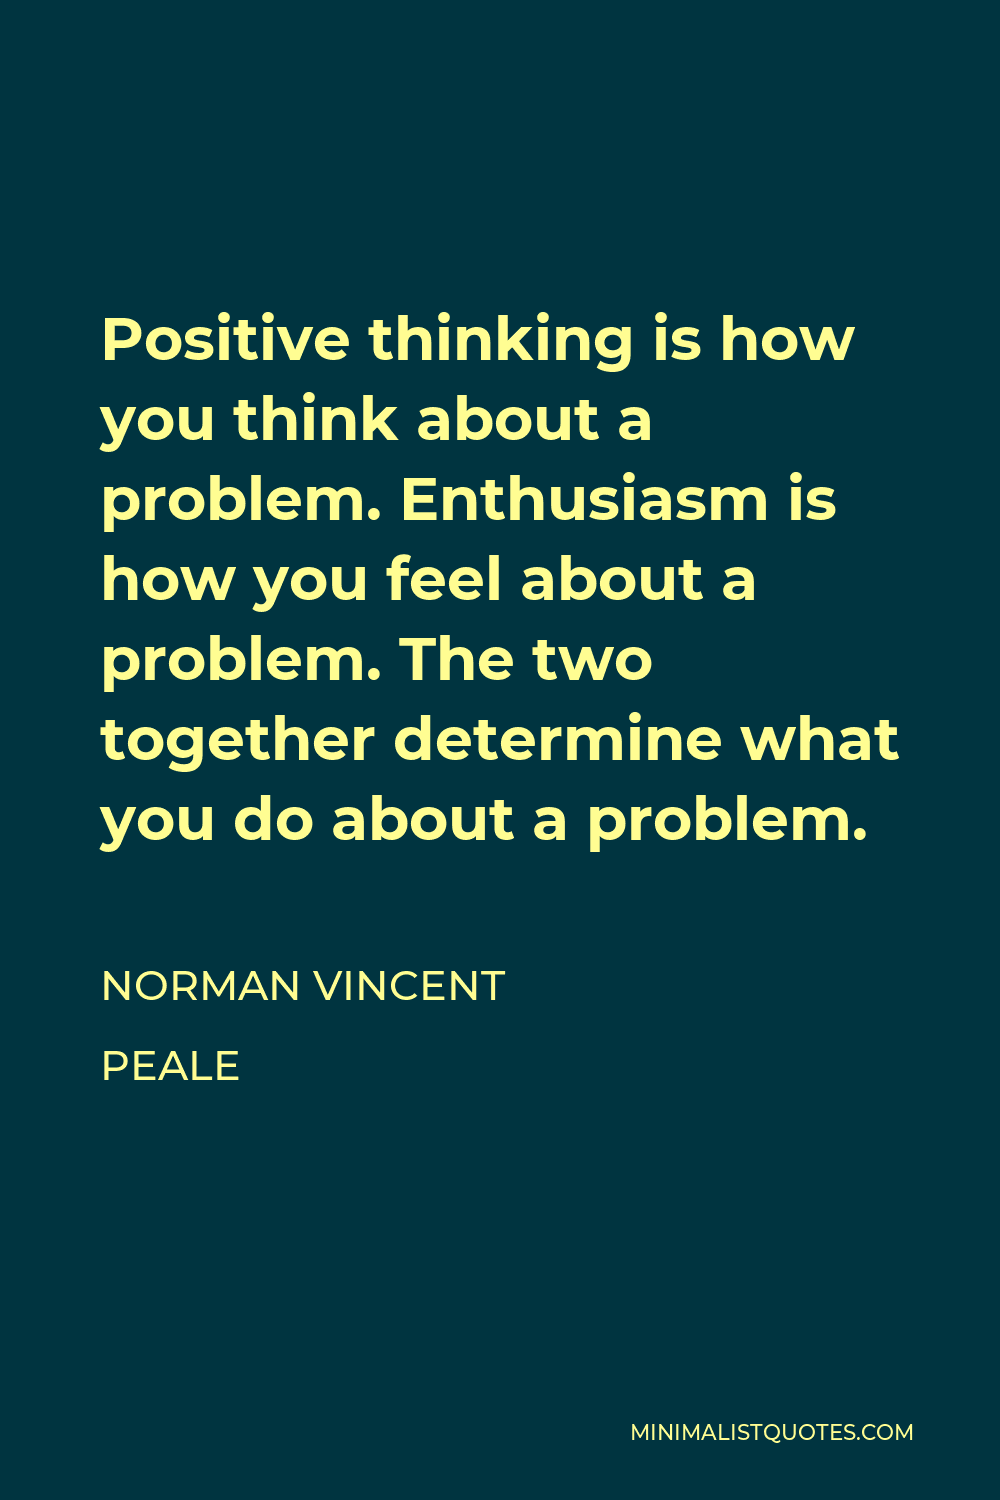 Norman Vincent Peale Quote - Positive thinking is how you think about a problem. Enthusiasm is how you feel about a problem. The two together determine what you do about a problem.